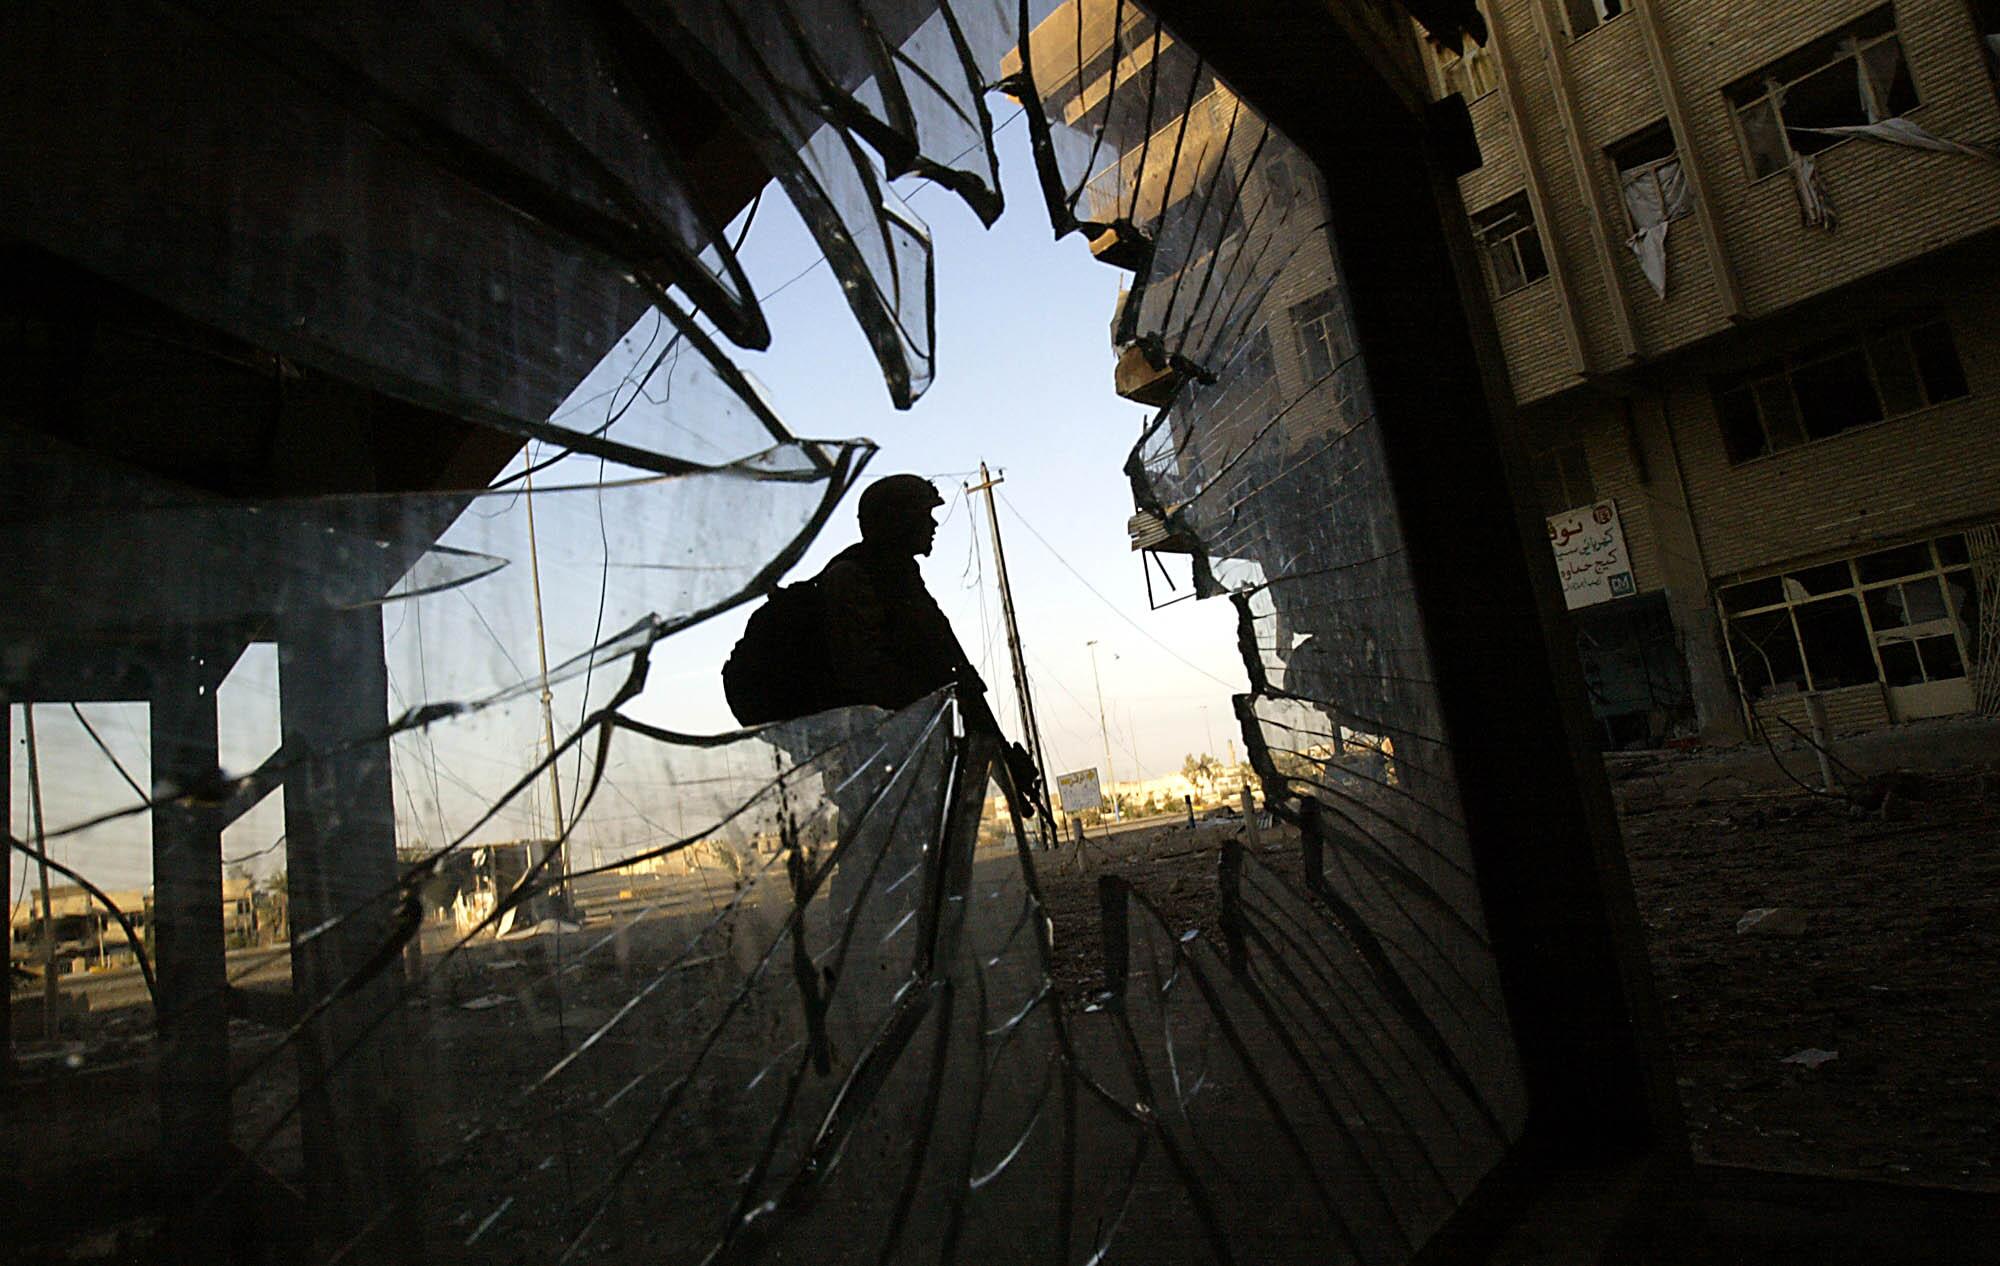 A Marine stands guard, seen through a hole in shattered glass